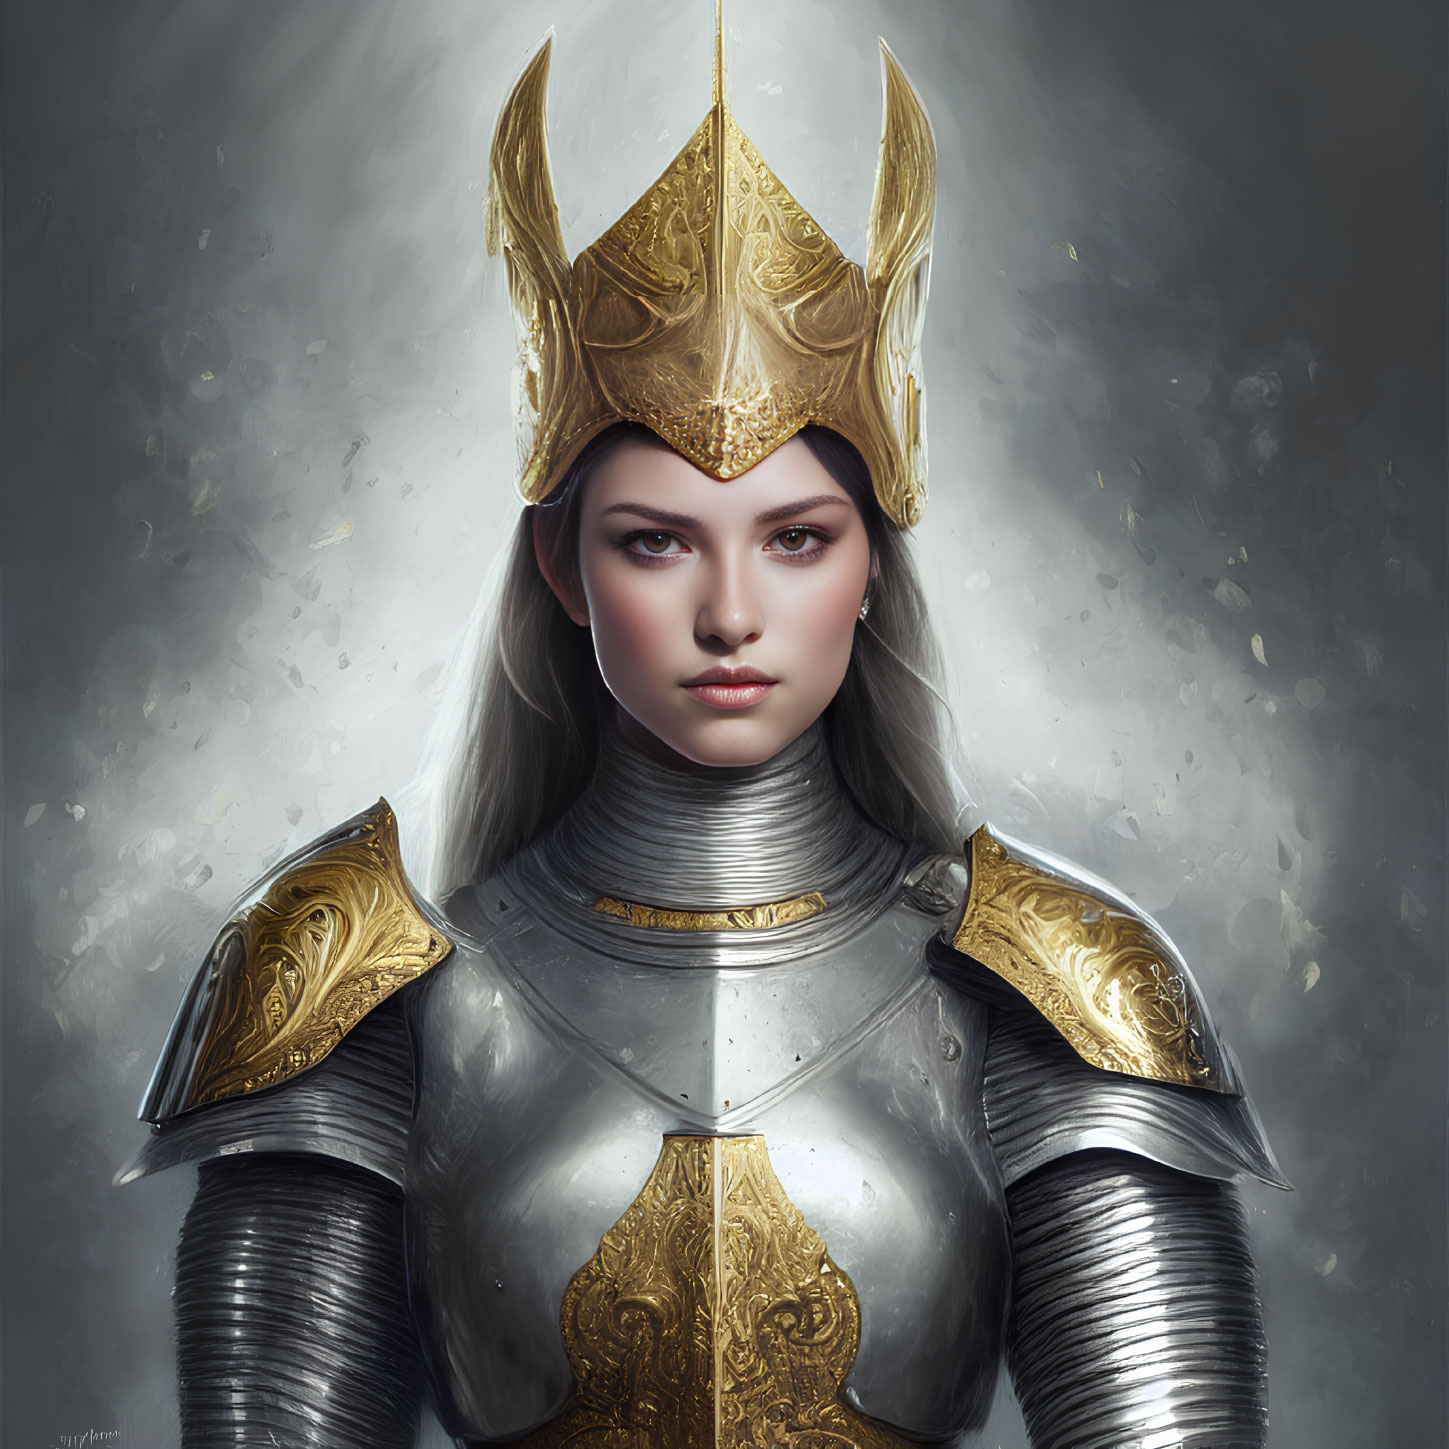 Medieval woman in ornate armor and golden crown, gazing ahead.